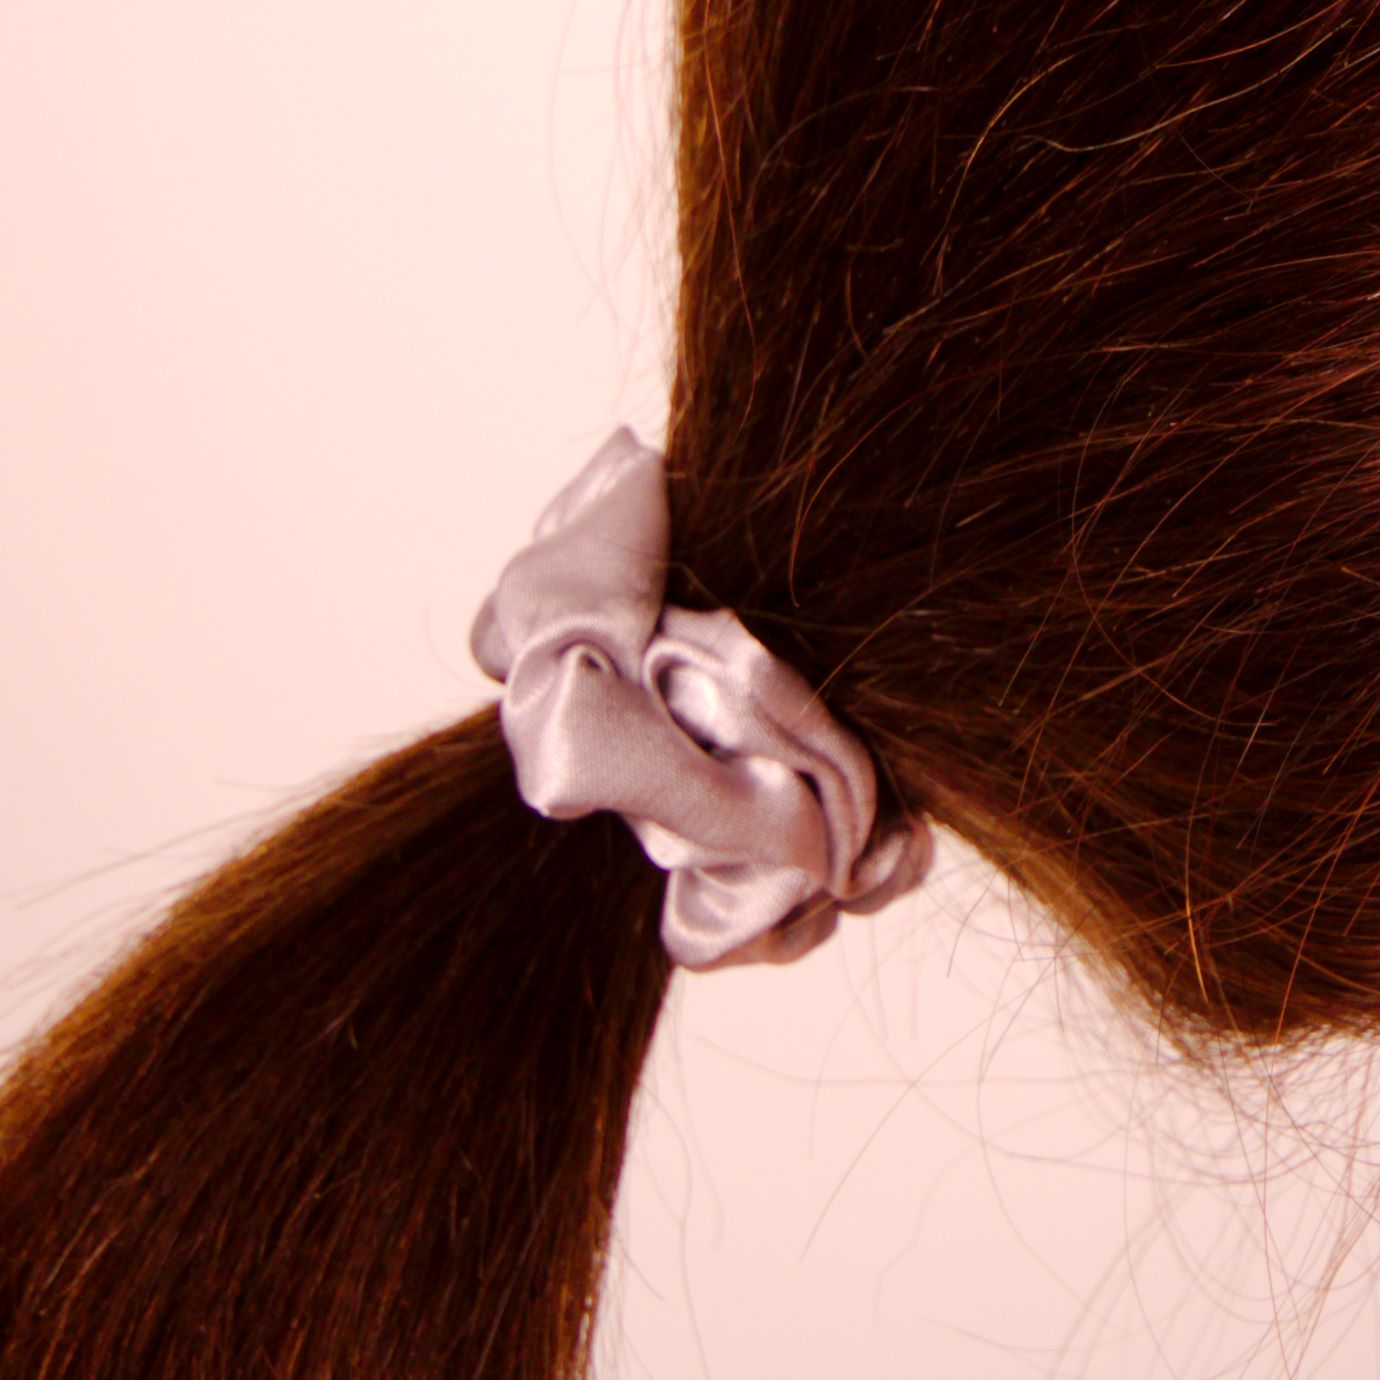 Amelia Beauty, Gray Satin Scrunchies, 2.25in Diameter, Gentle on Hair, Strong Hold, No Snag, No Dents or Creases. 12 Pack